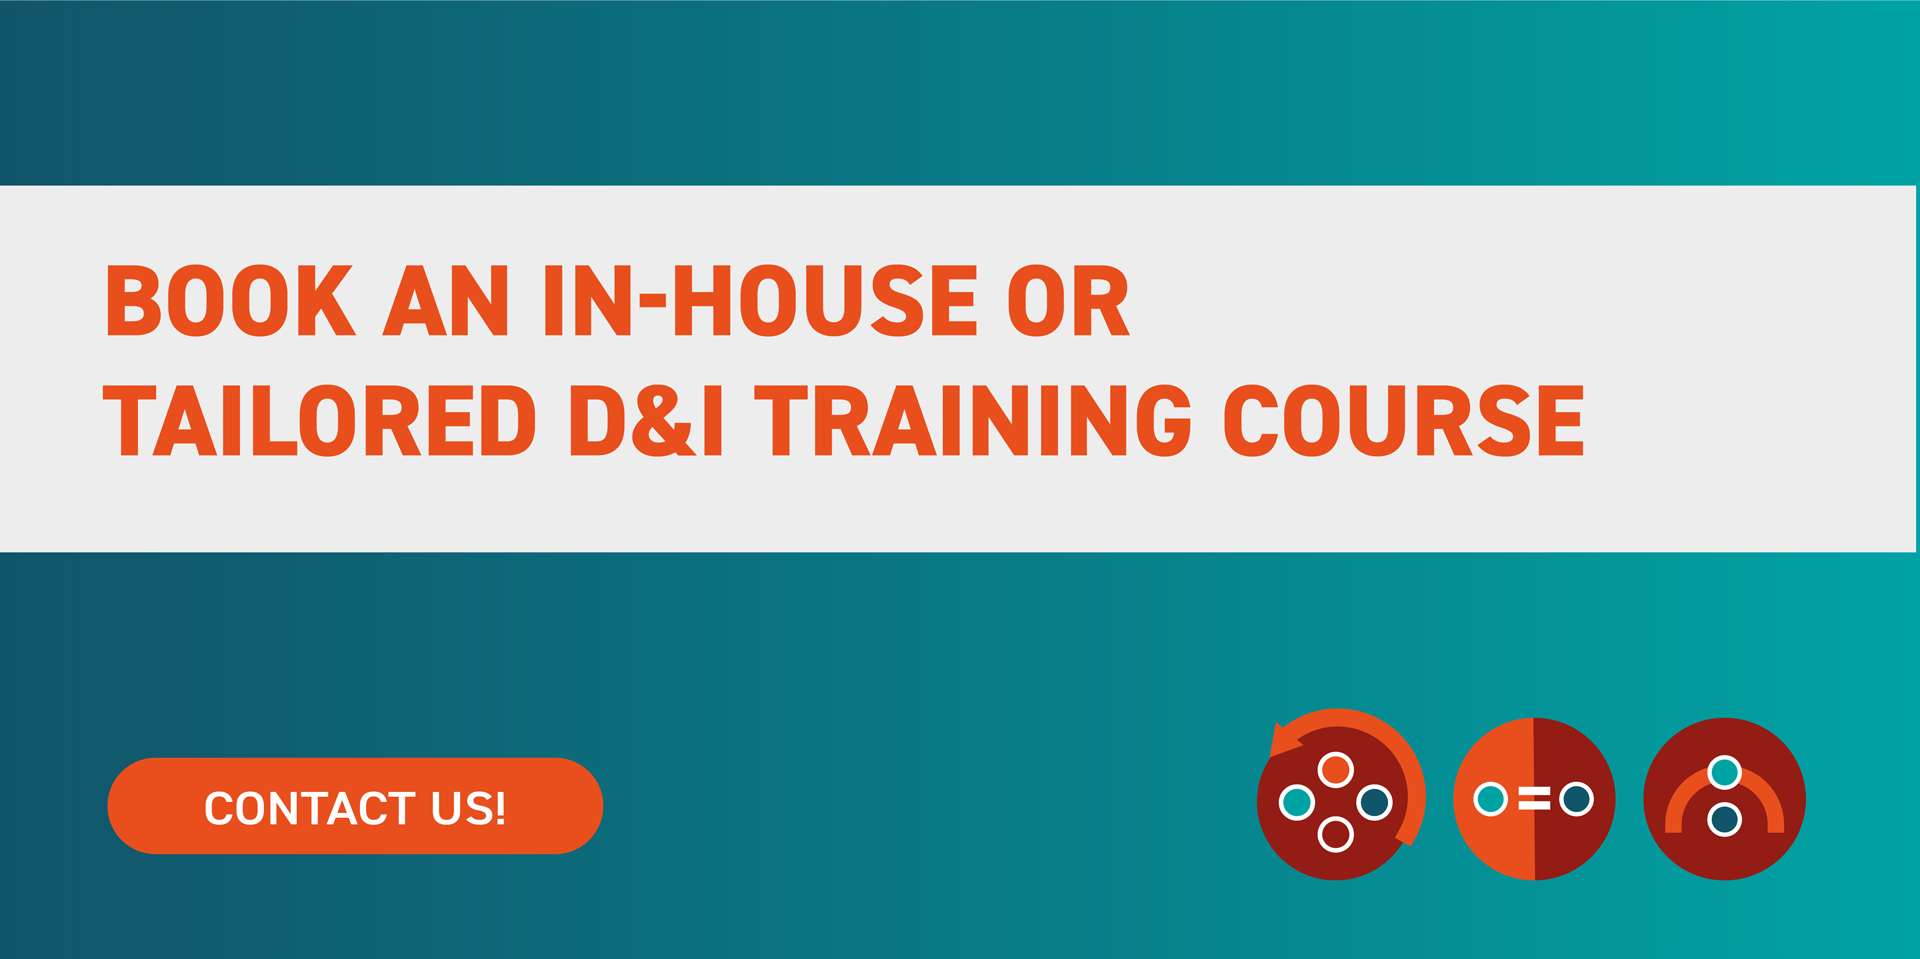 BOOK AN INHOUSE OR TAILORED D&I TRAINING COURSE